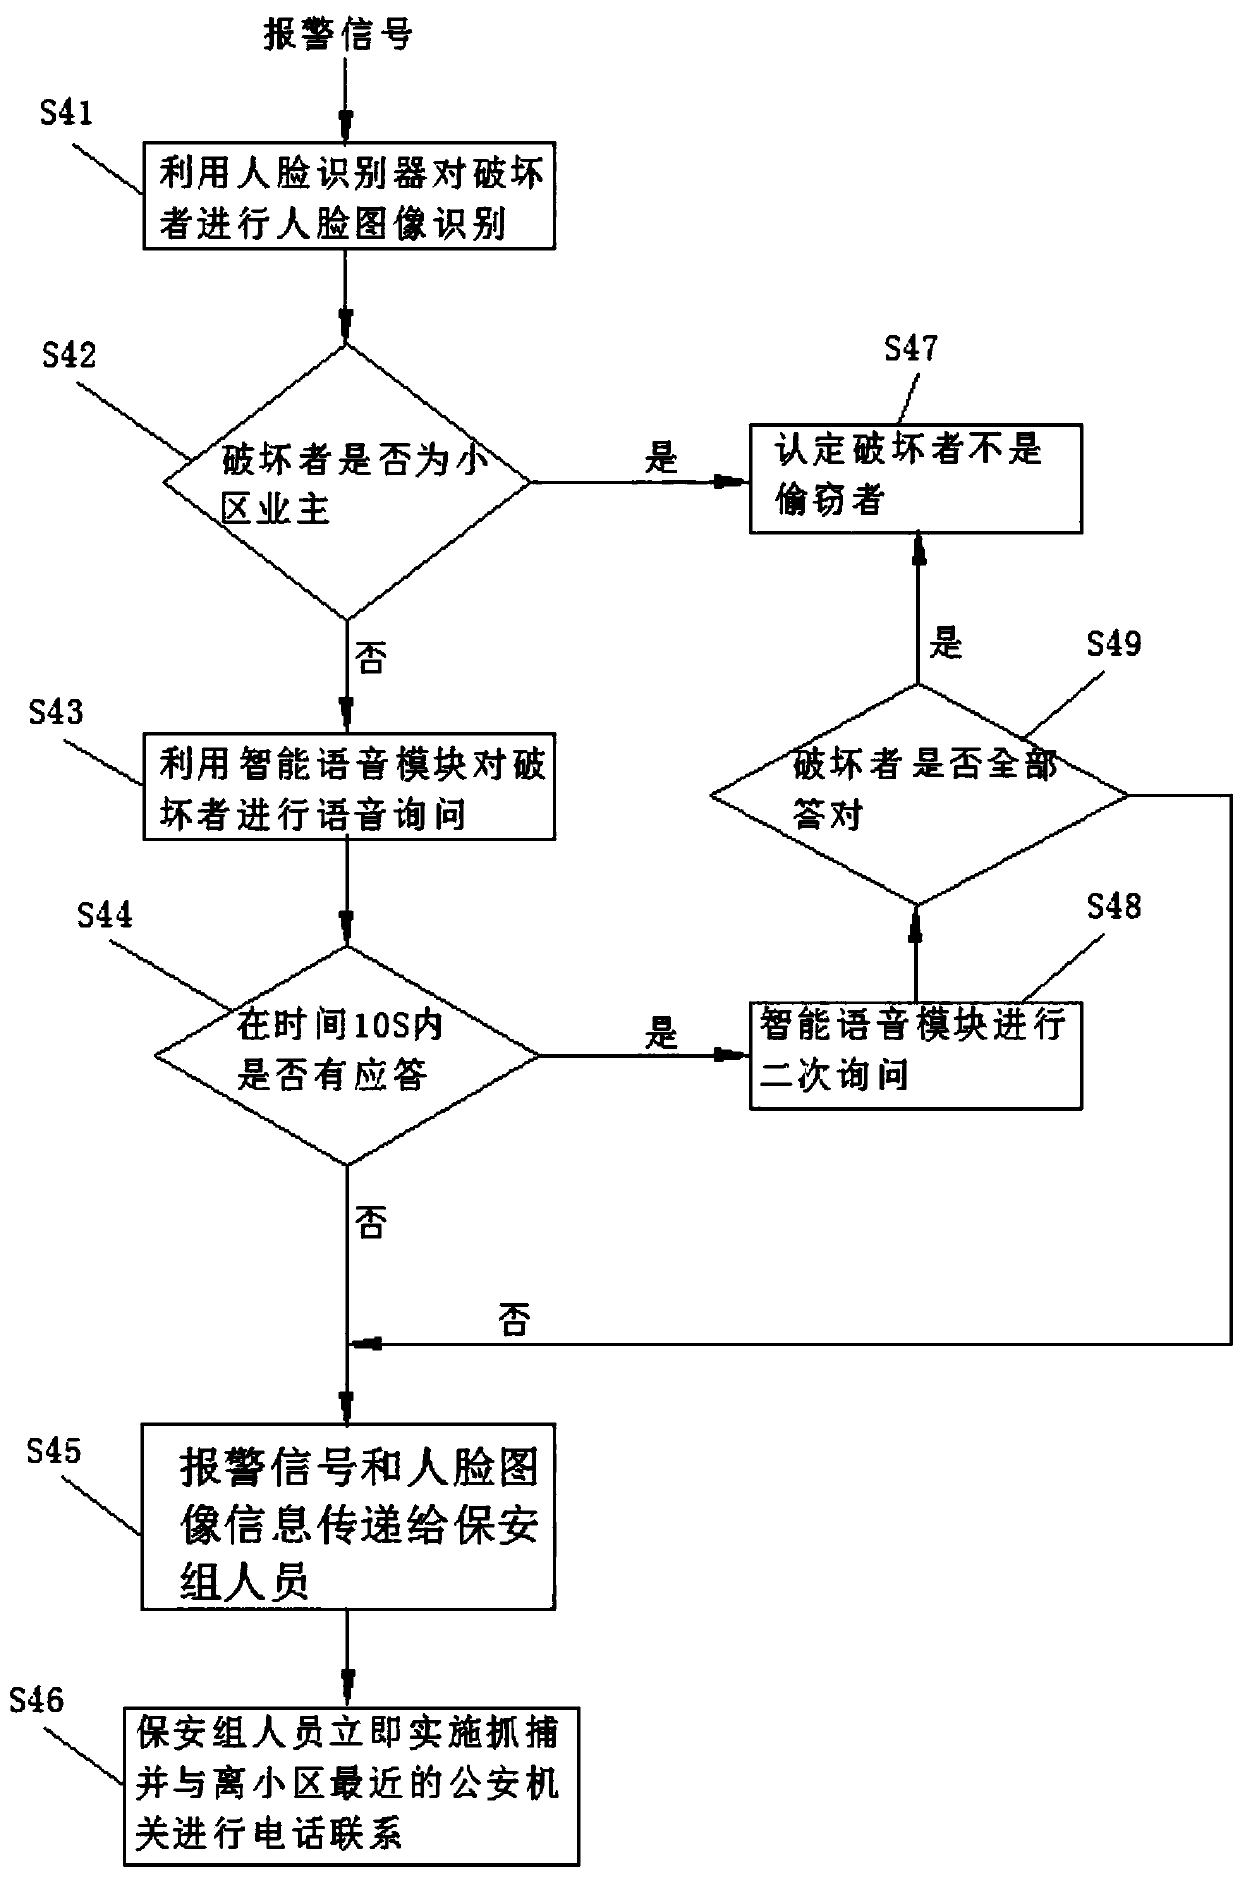 Property alarm center management method and management system thereof, and comprehensive property management system